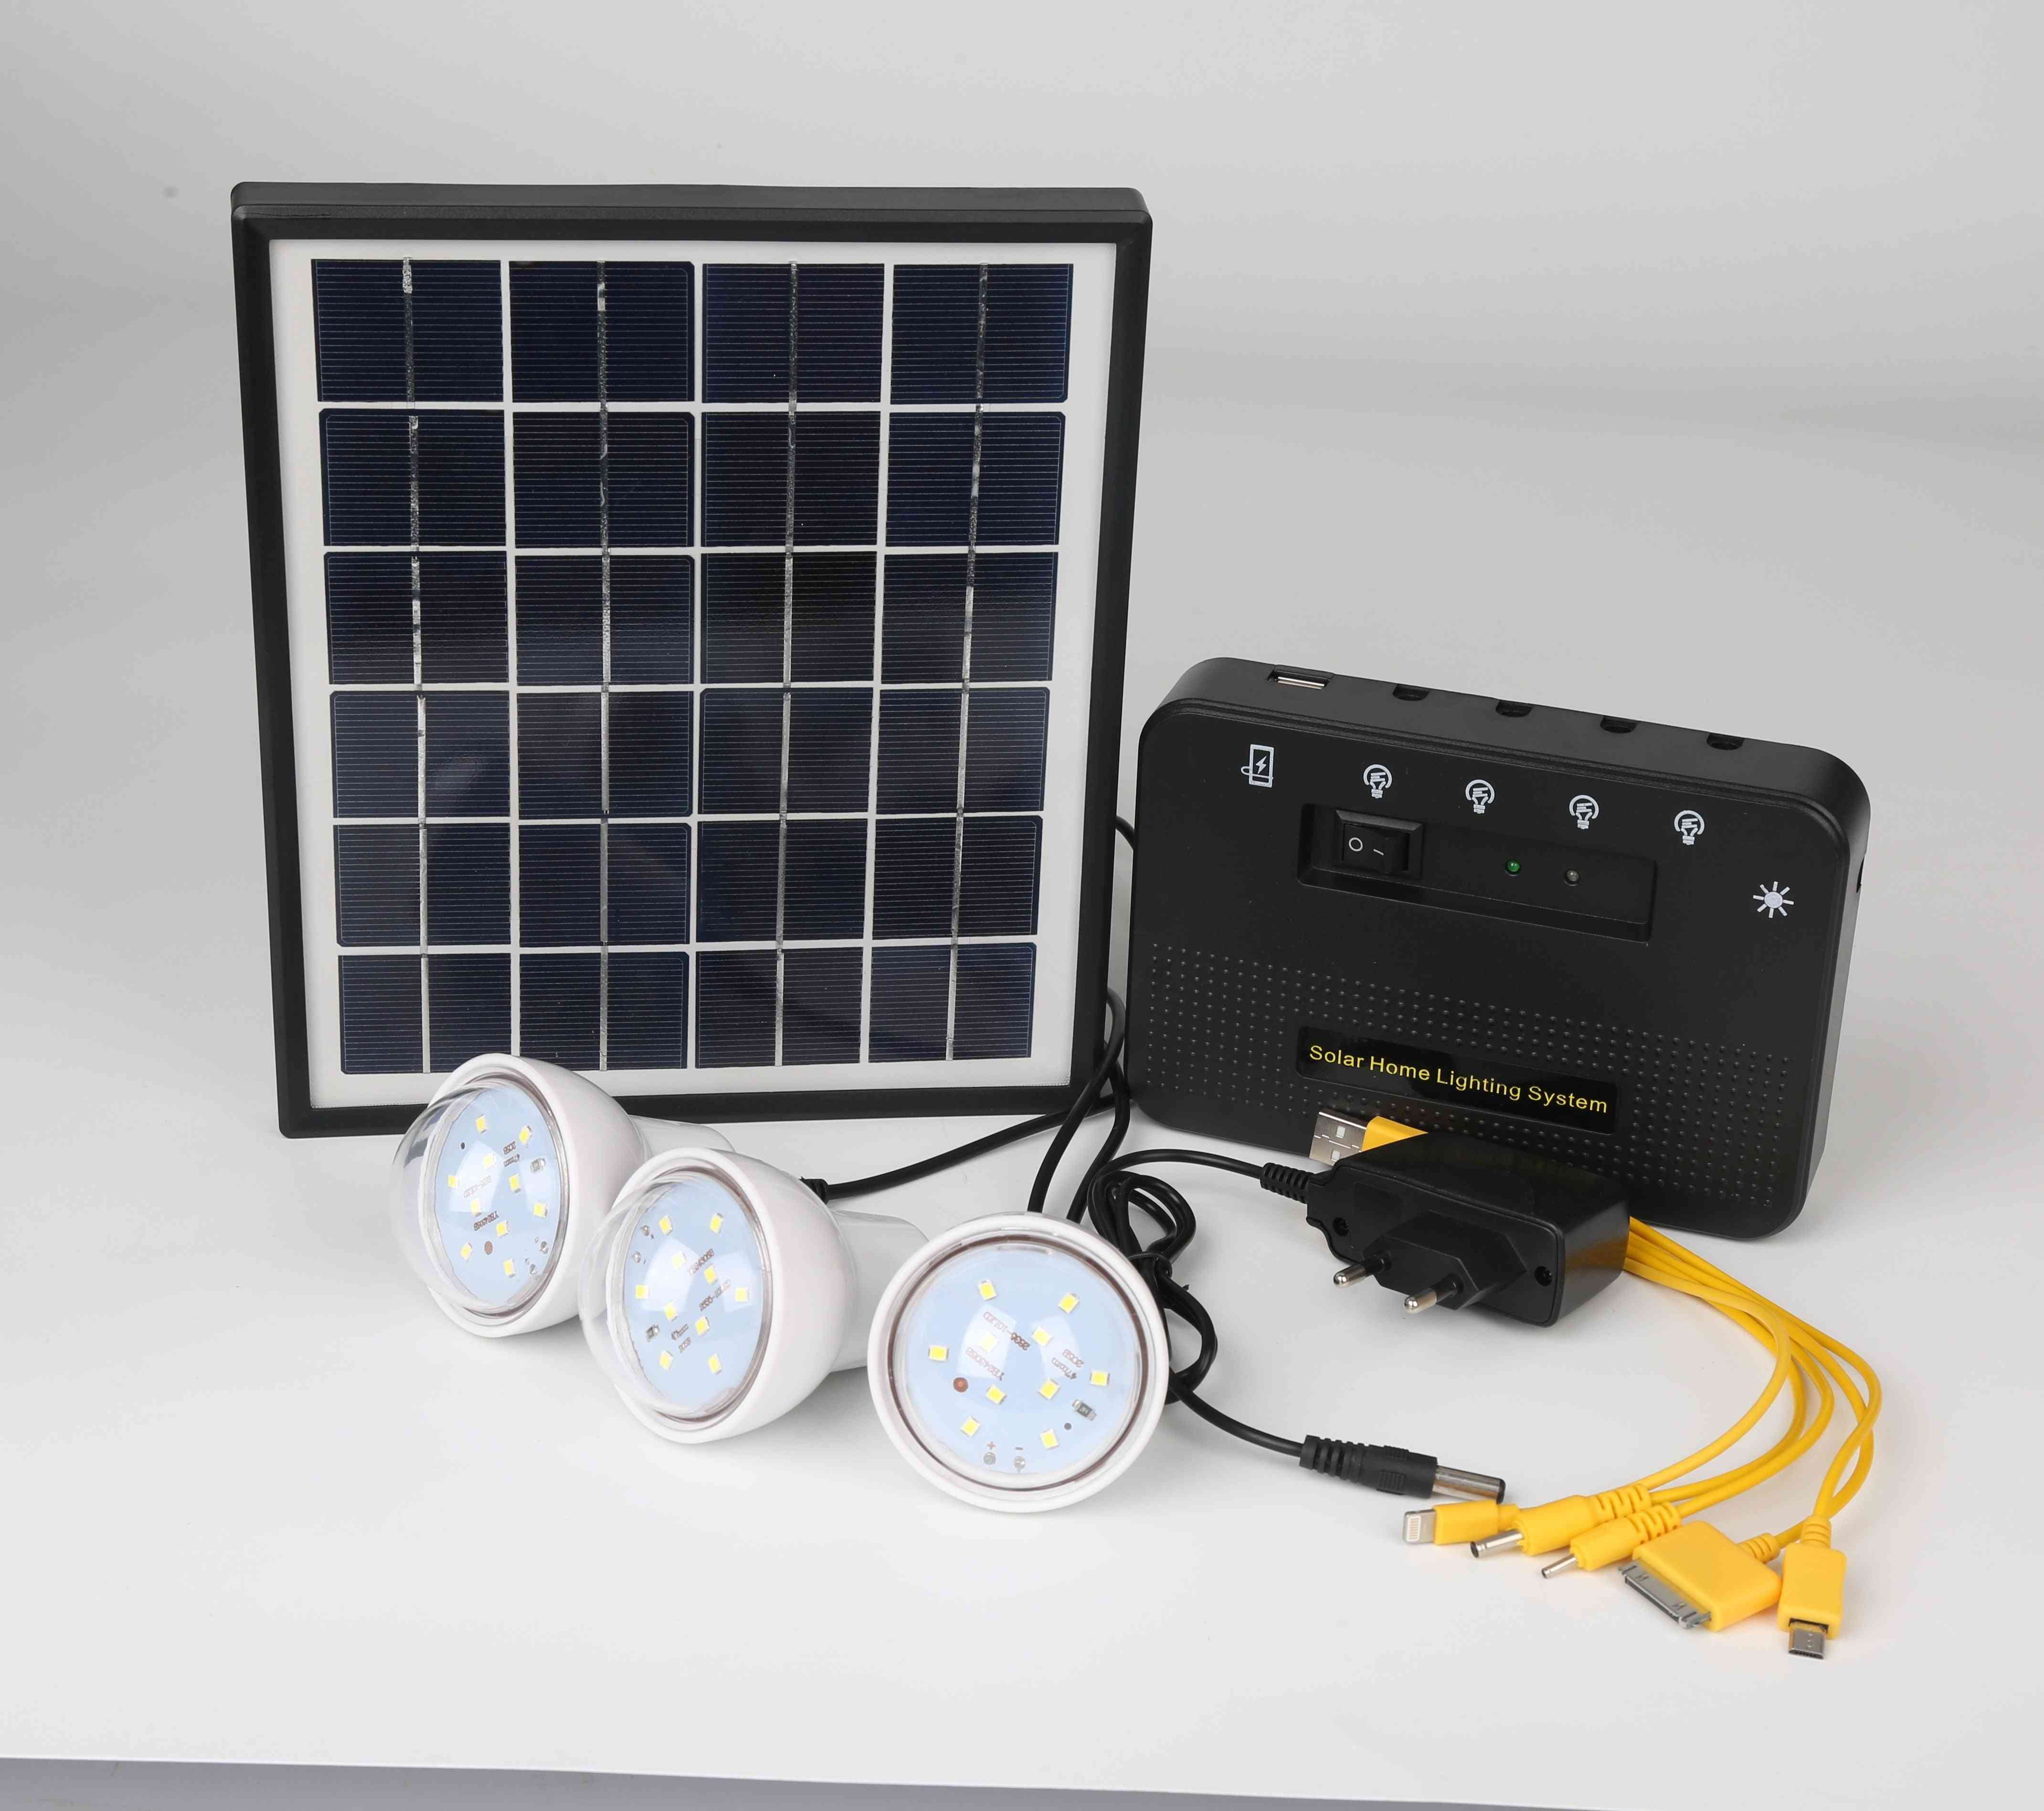 1.5w Portable Solar Home Lighting Systems With 3 Meters Cable And 4.5ah Lithium Battery